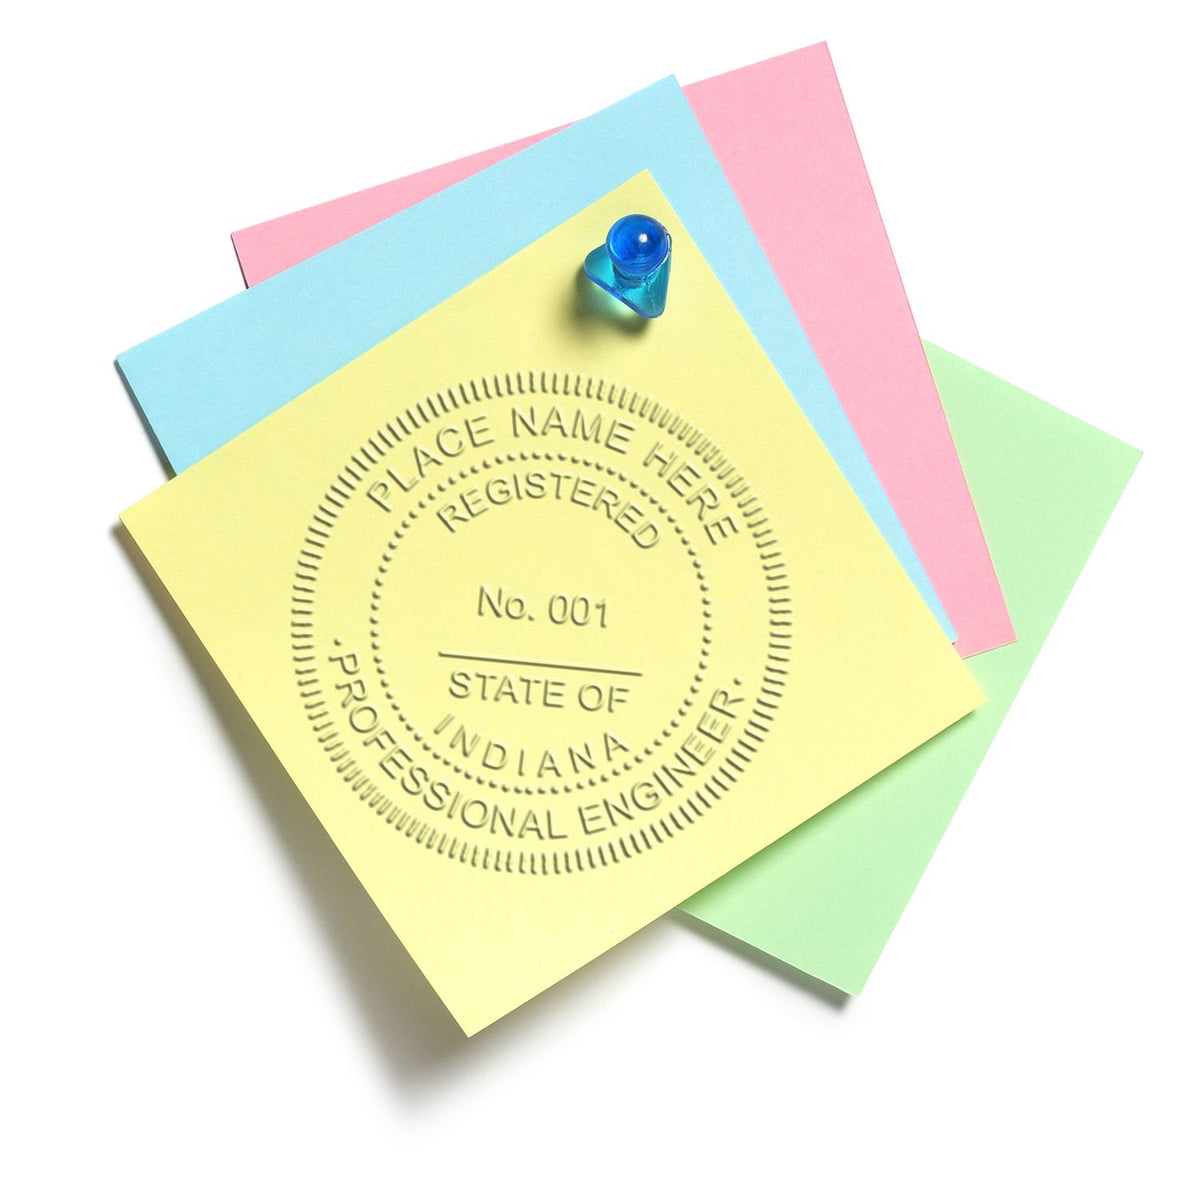 This paper is stamped with a sample imprint of the Indiana Engineer Desk Seal, signifying its quality and reliability.